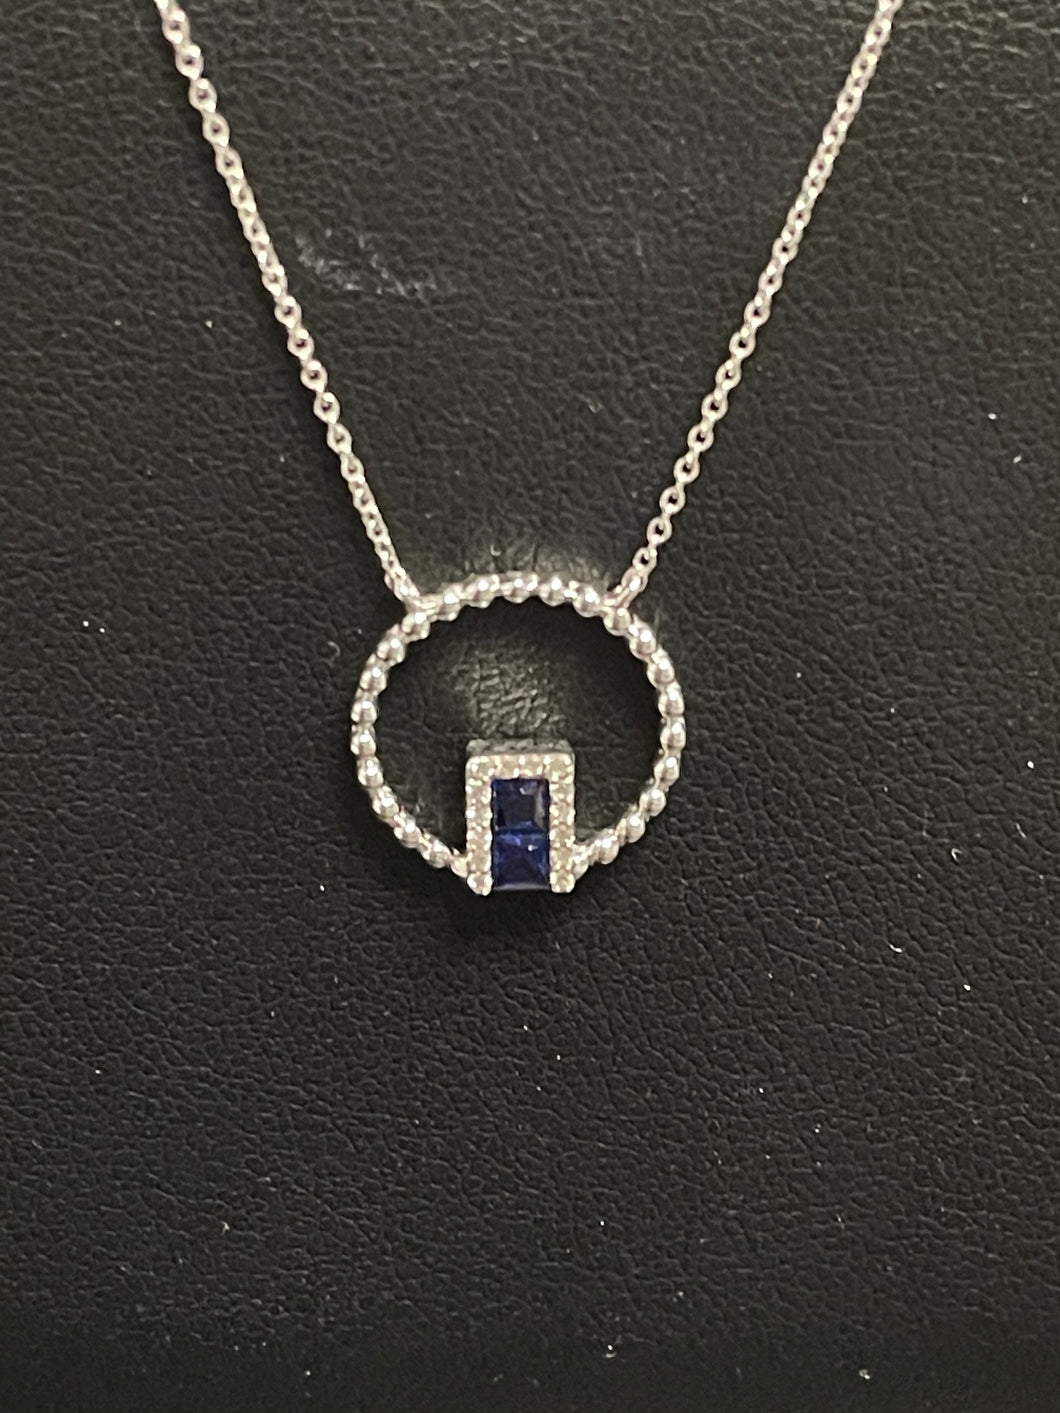 One Ladies 14k White Gold Sapphire and Diamond Pendant with Beaded Circle on an adjustable 16